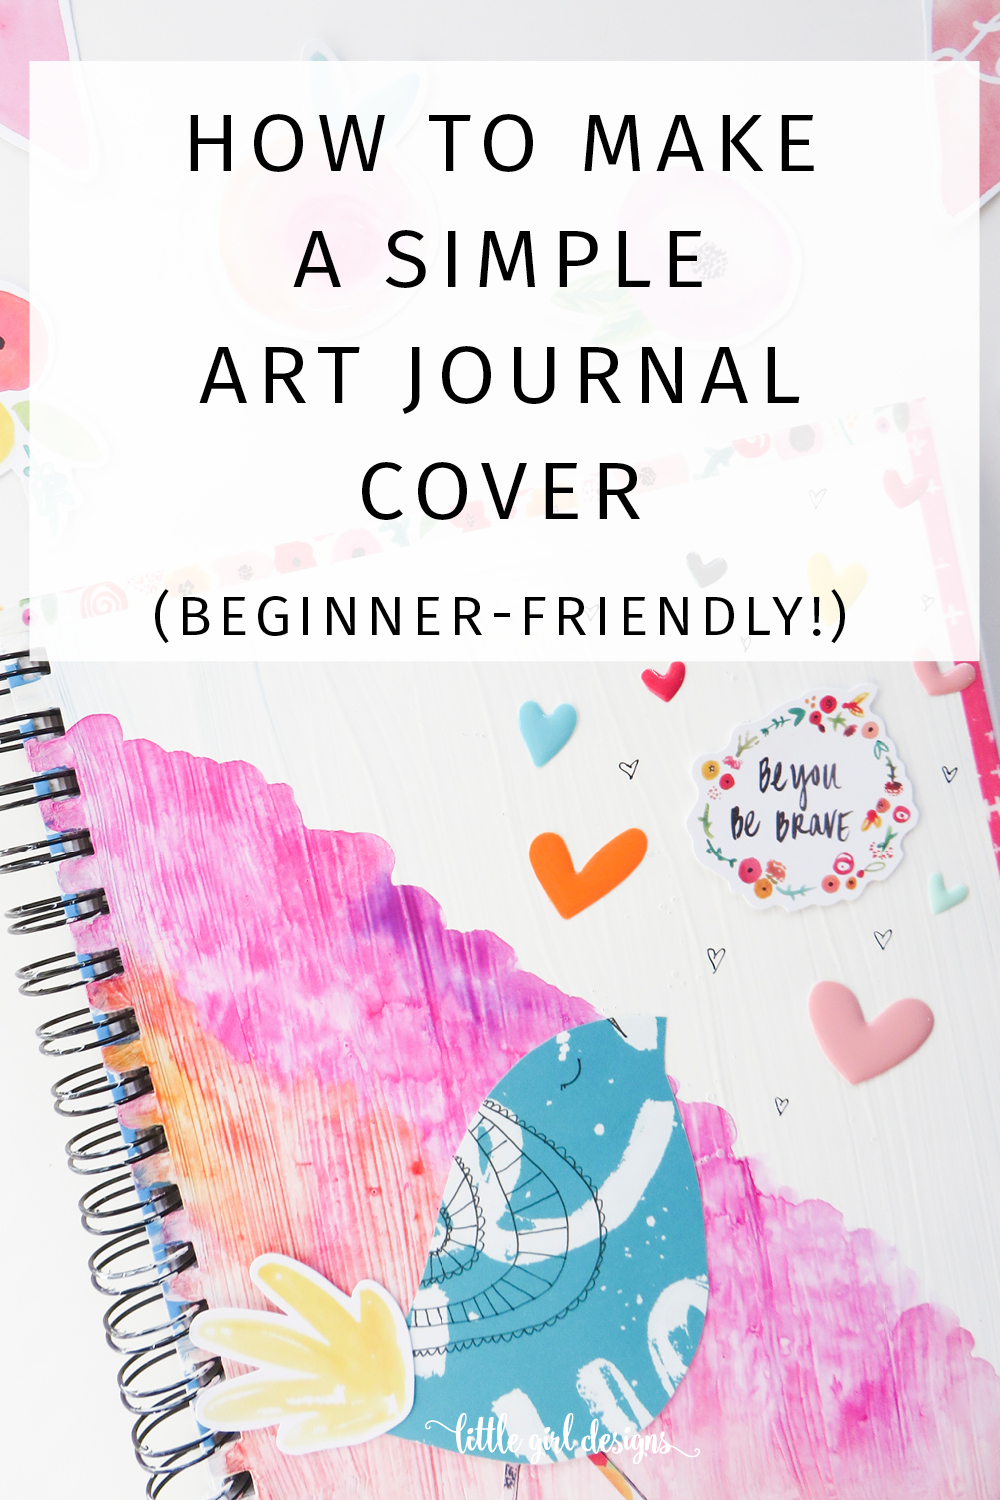 How to Make a Simple Art Journal Cover